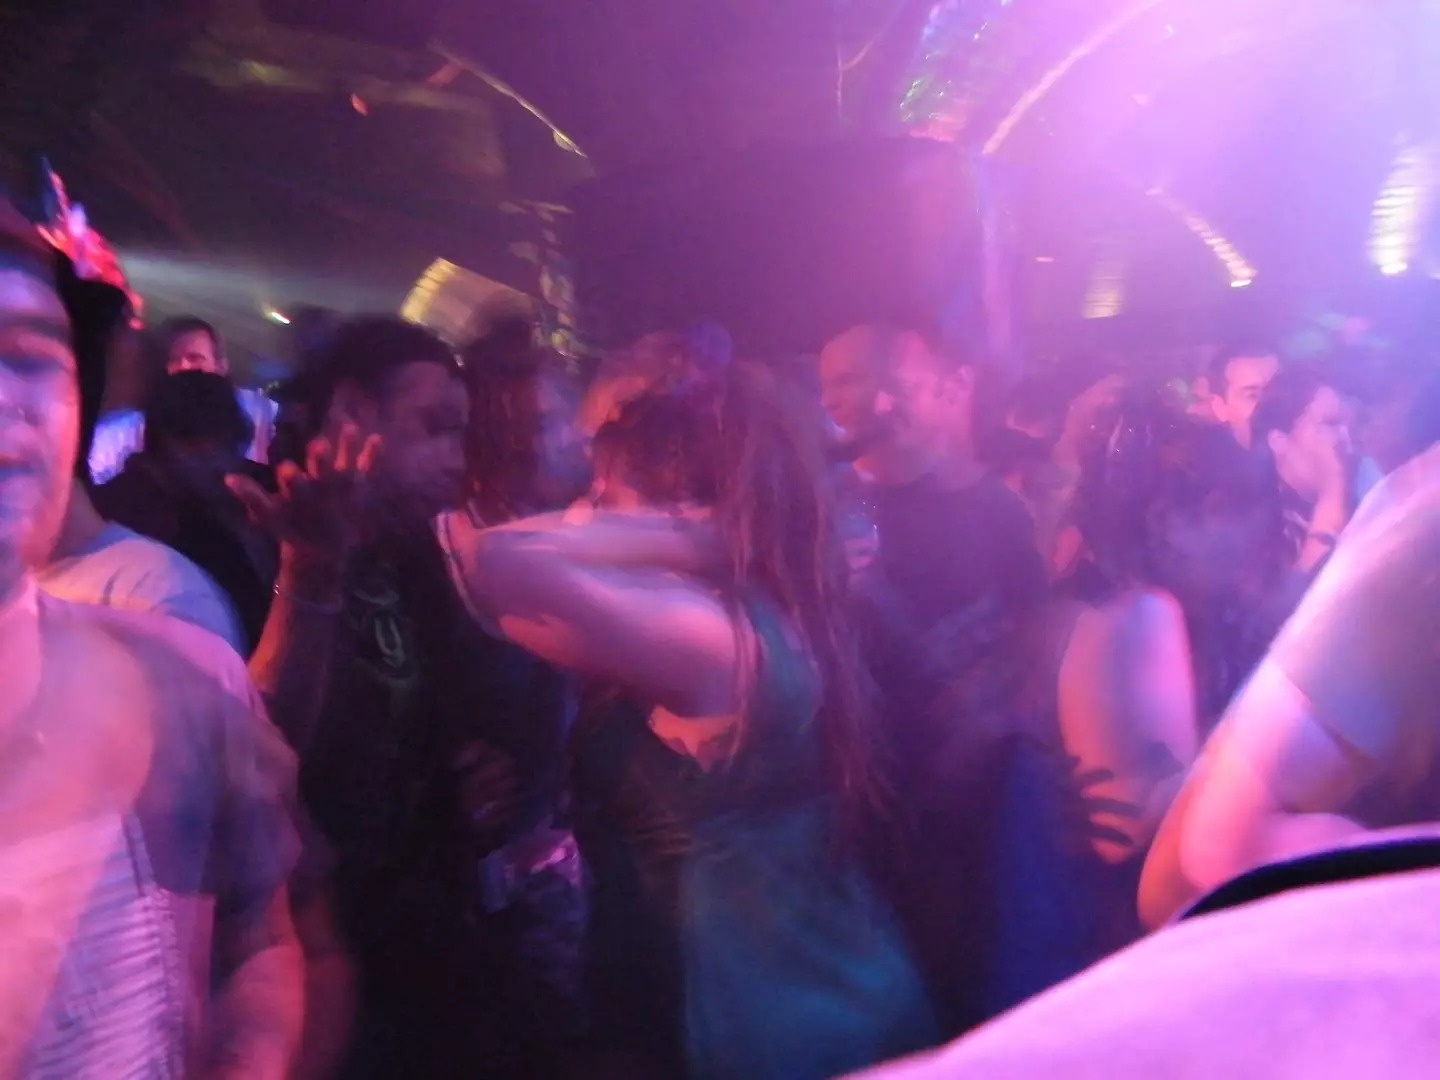 Nightclubs could be at risk in the government plan.